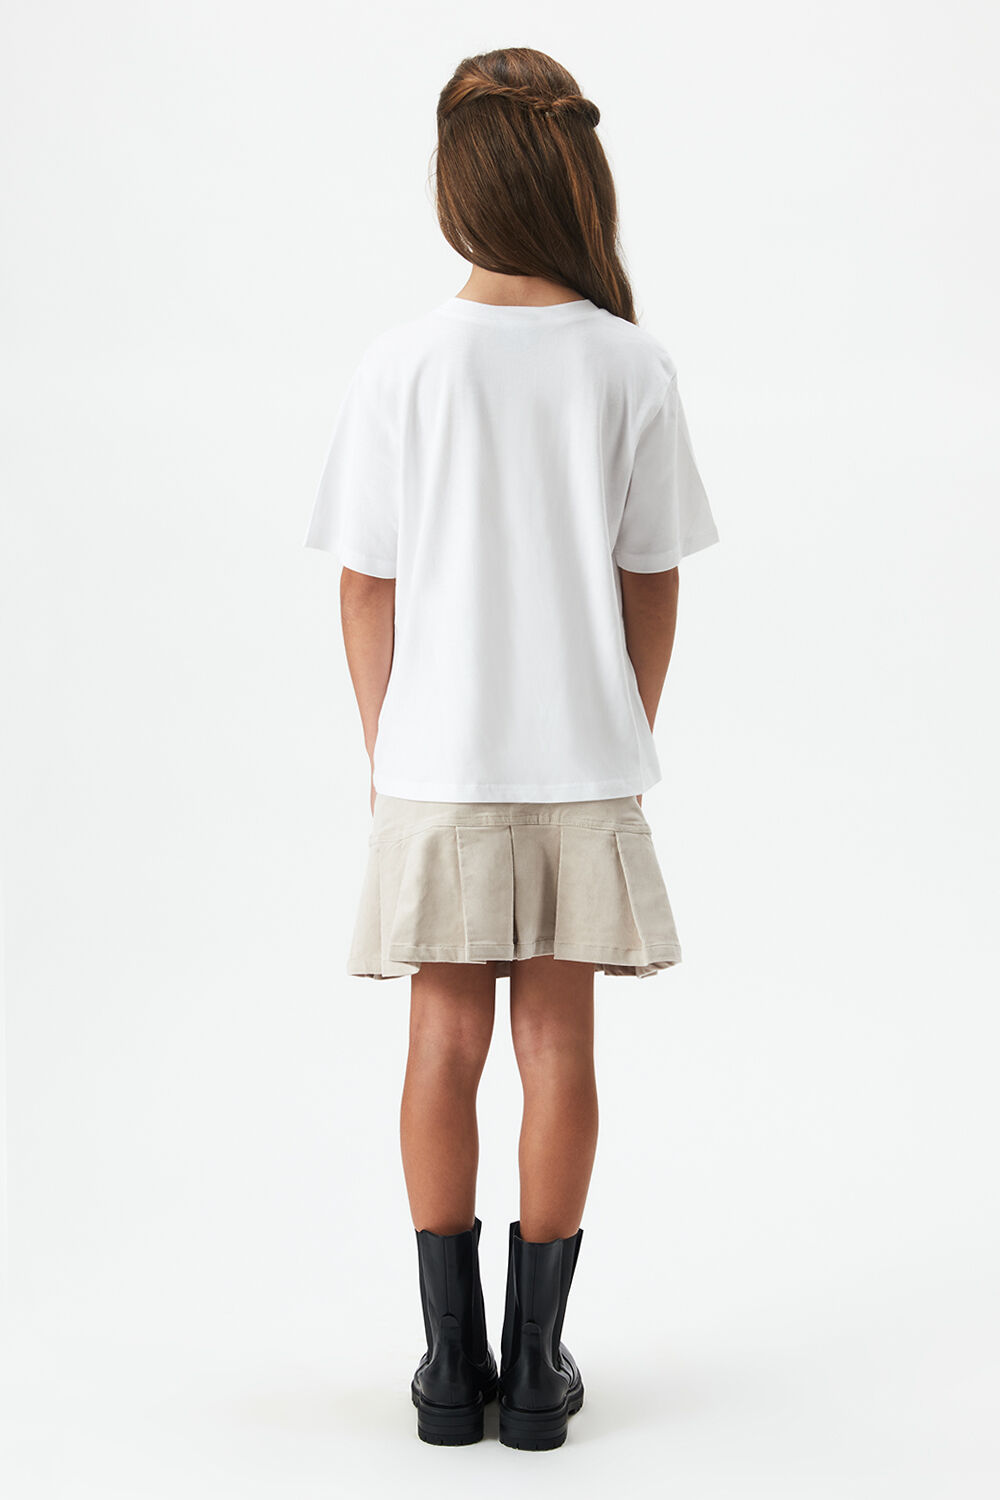 GIRLS EAGLE TEE in colour BRIGHT WHITE